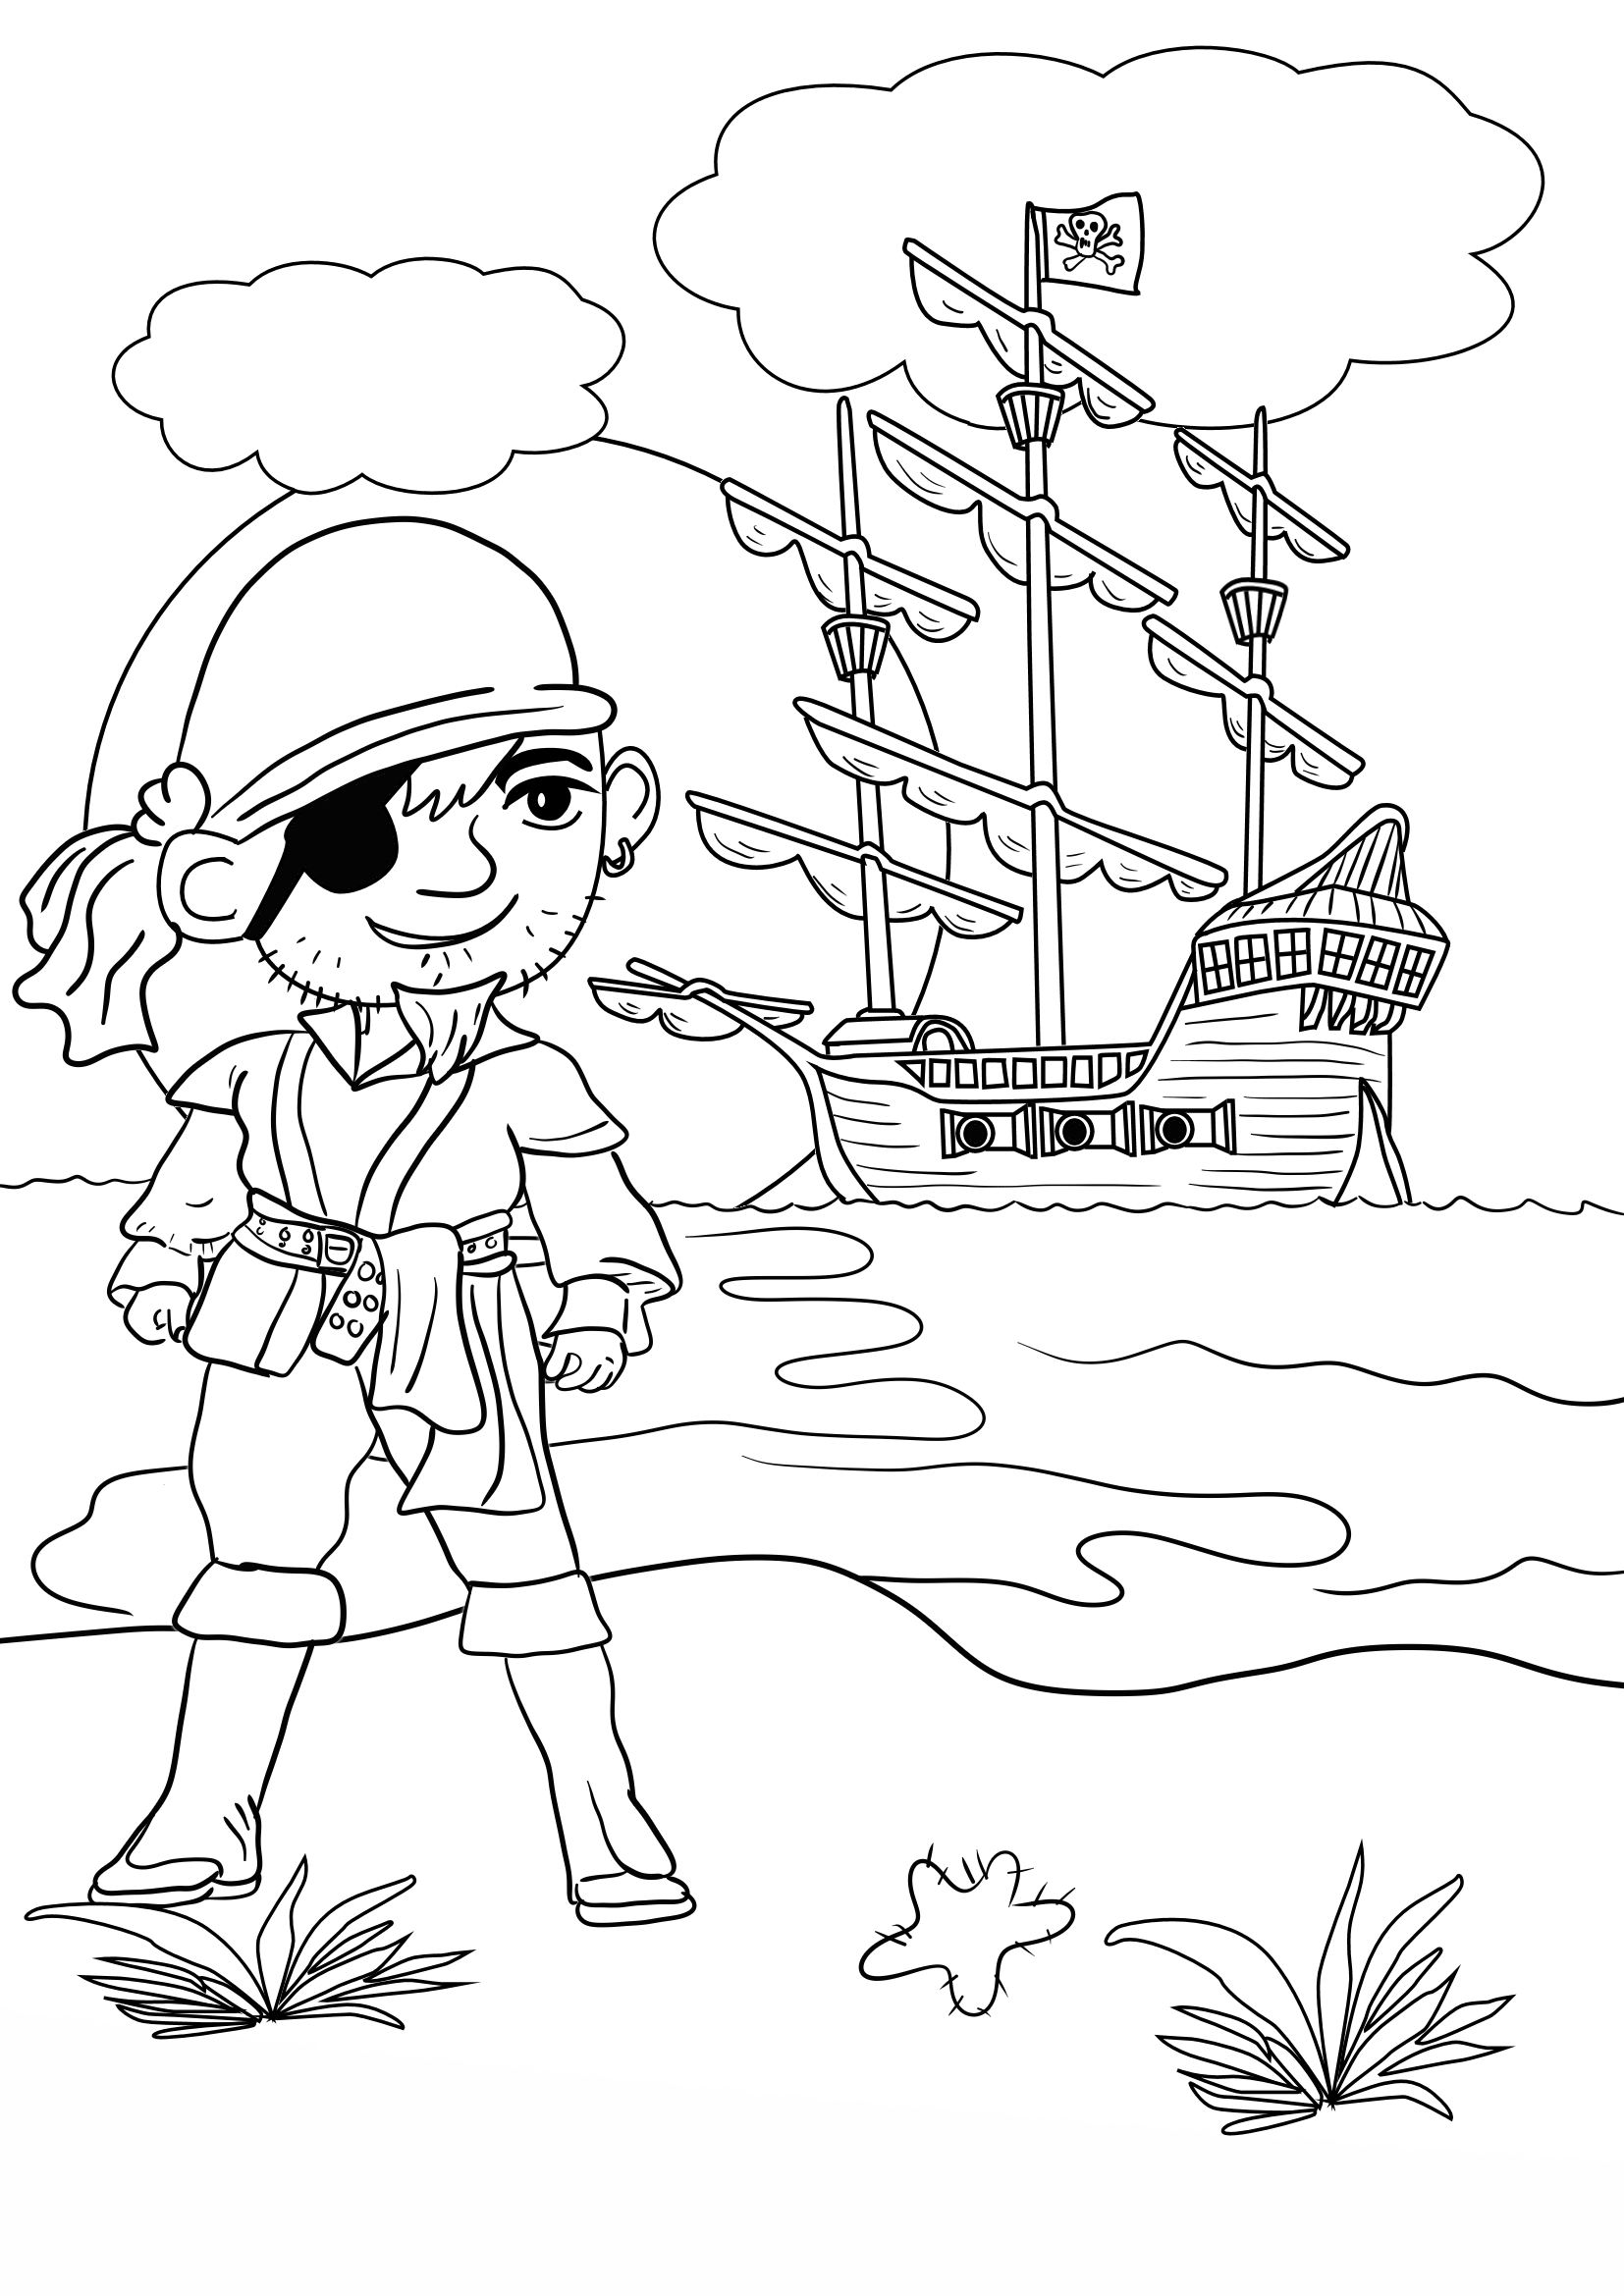 pirate ship to color pirate ship coloring pages to download and print for free to ship color pirate 